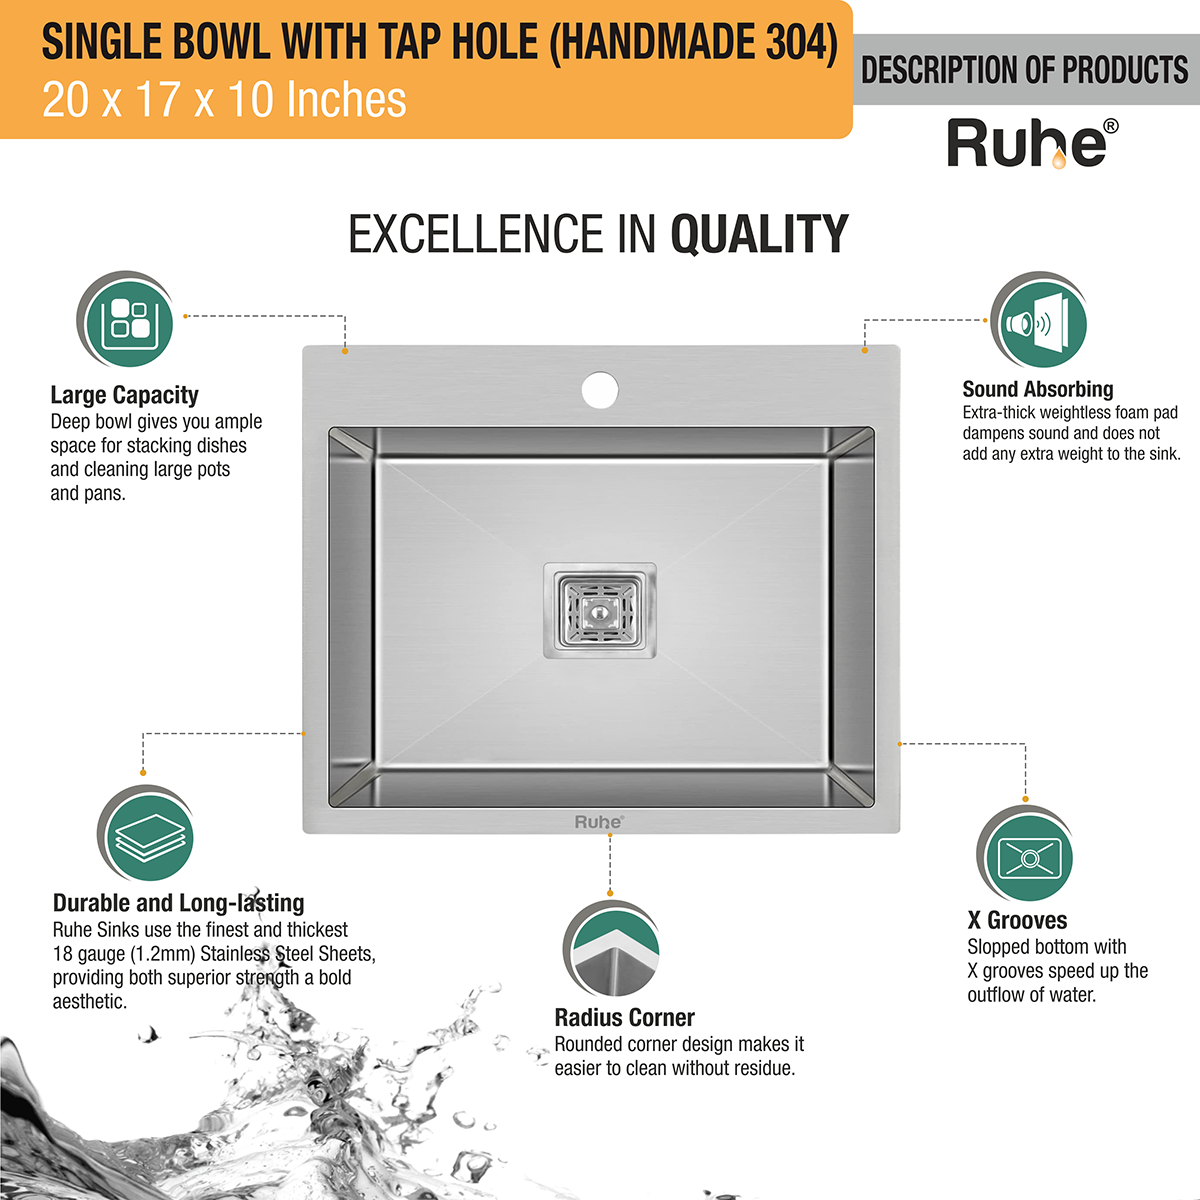 Handmade Single Bowl 304-Grade Kitchen Sink (20 x 17 x 10 Inches) with Tap Hole quality products